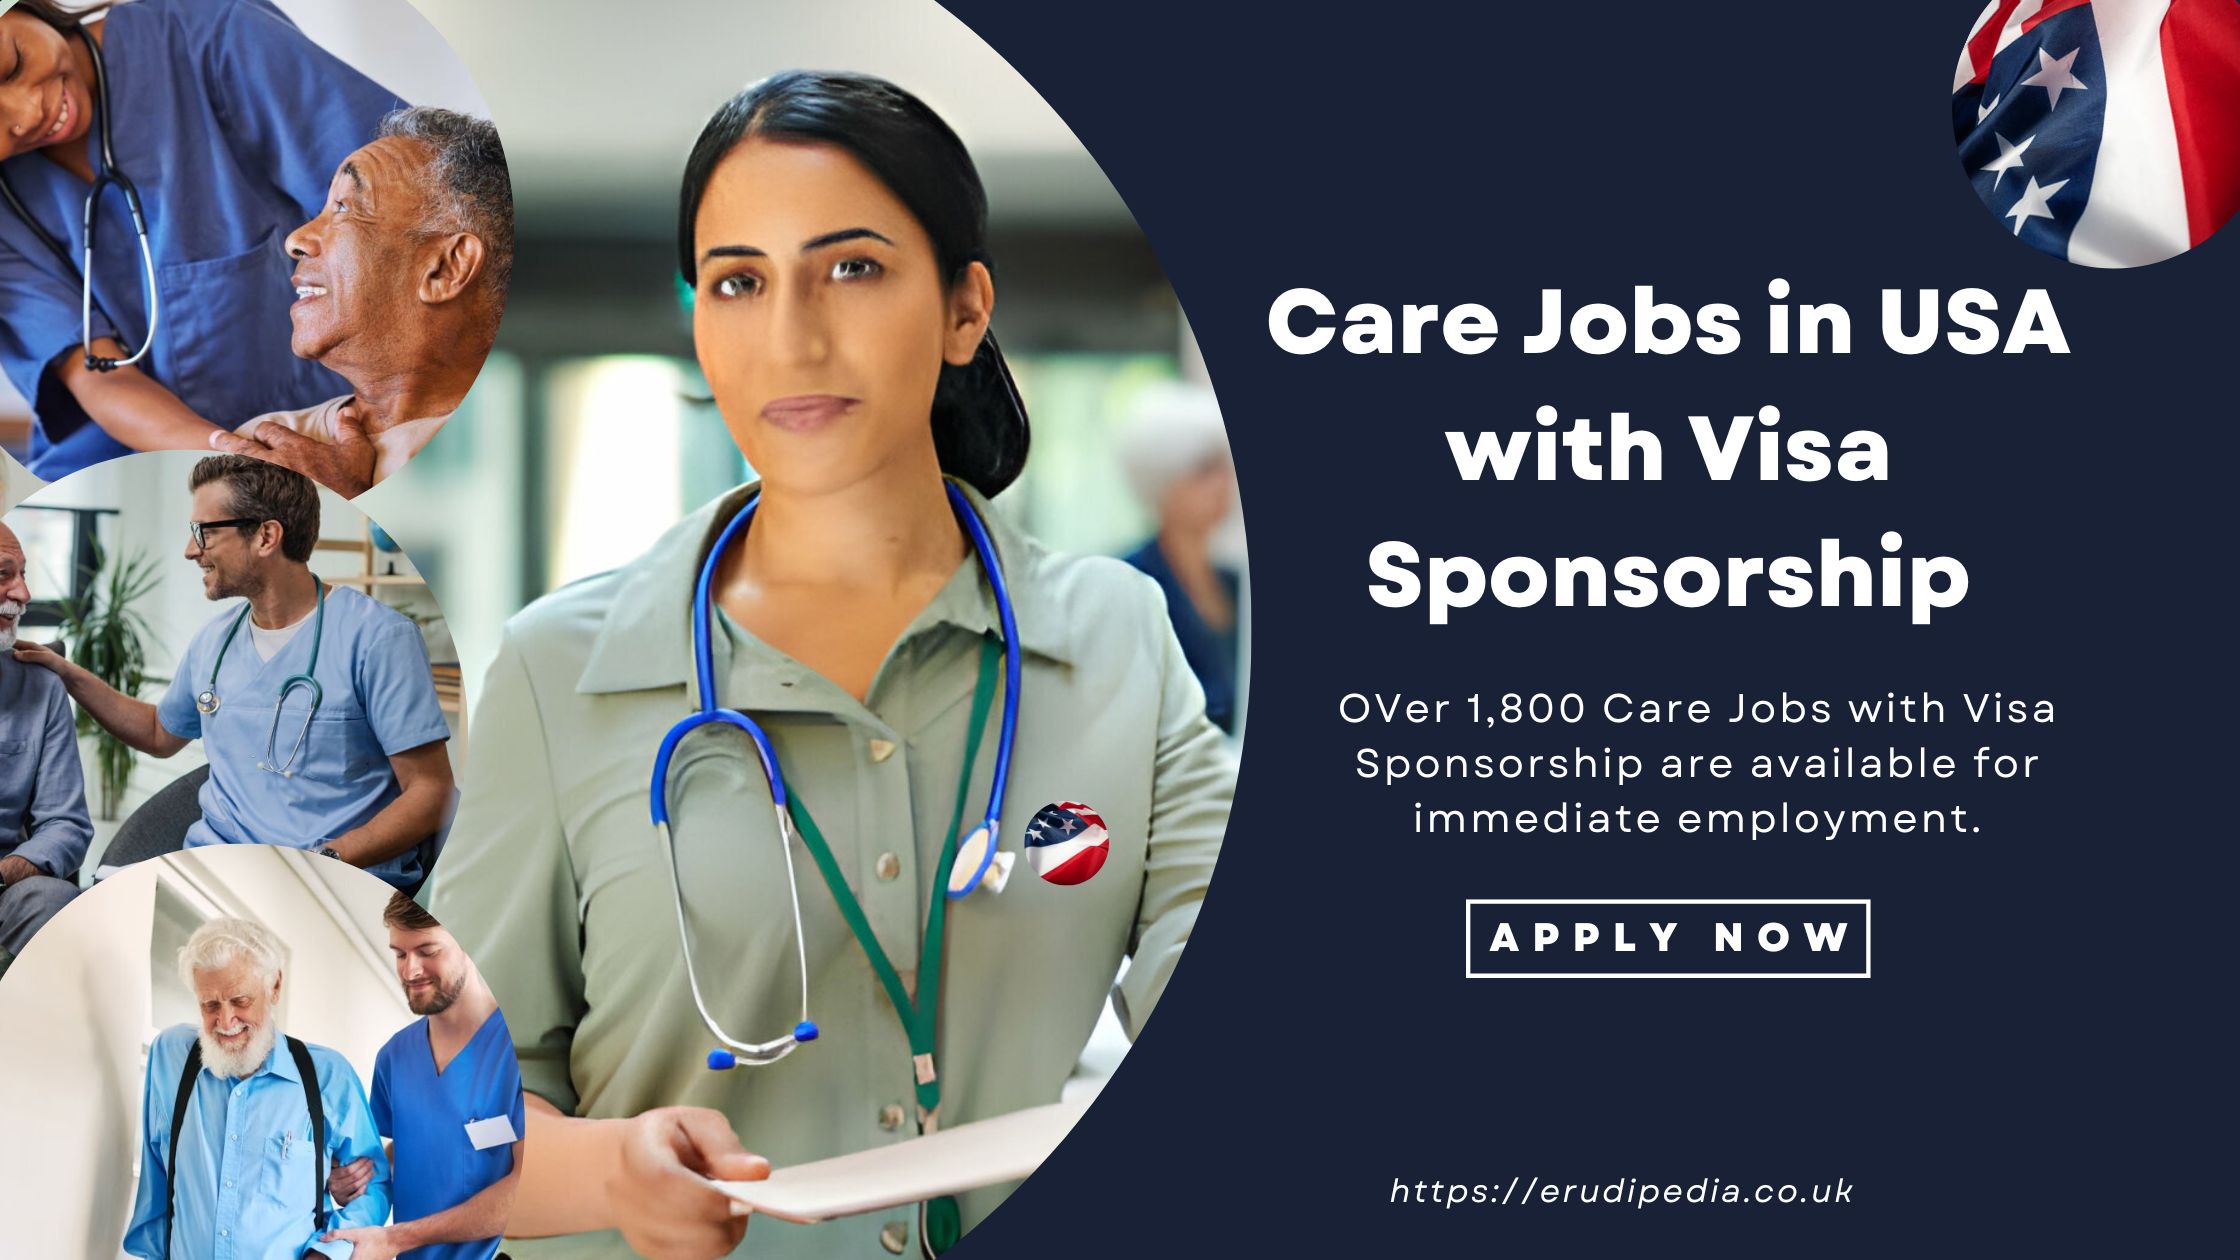 Care Jobs in USA with Visa Sponsorship - Apply Now (Closes Soon)